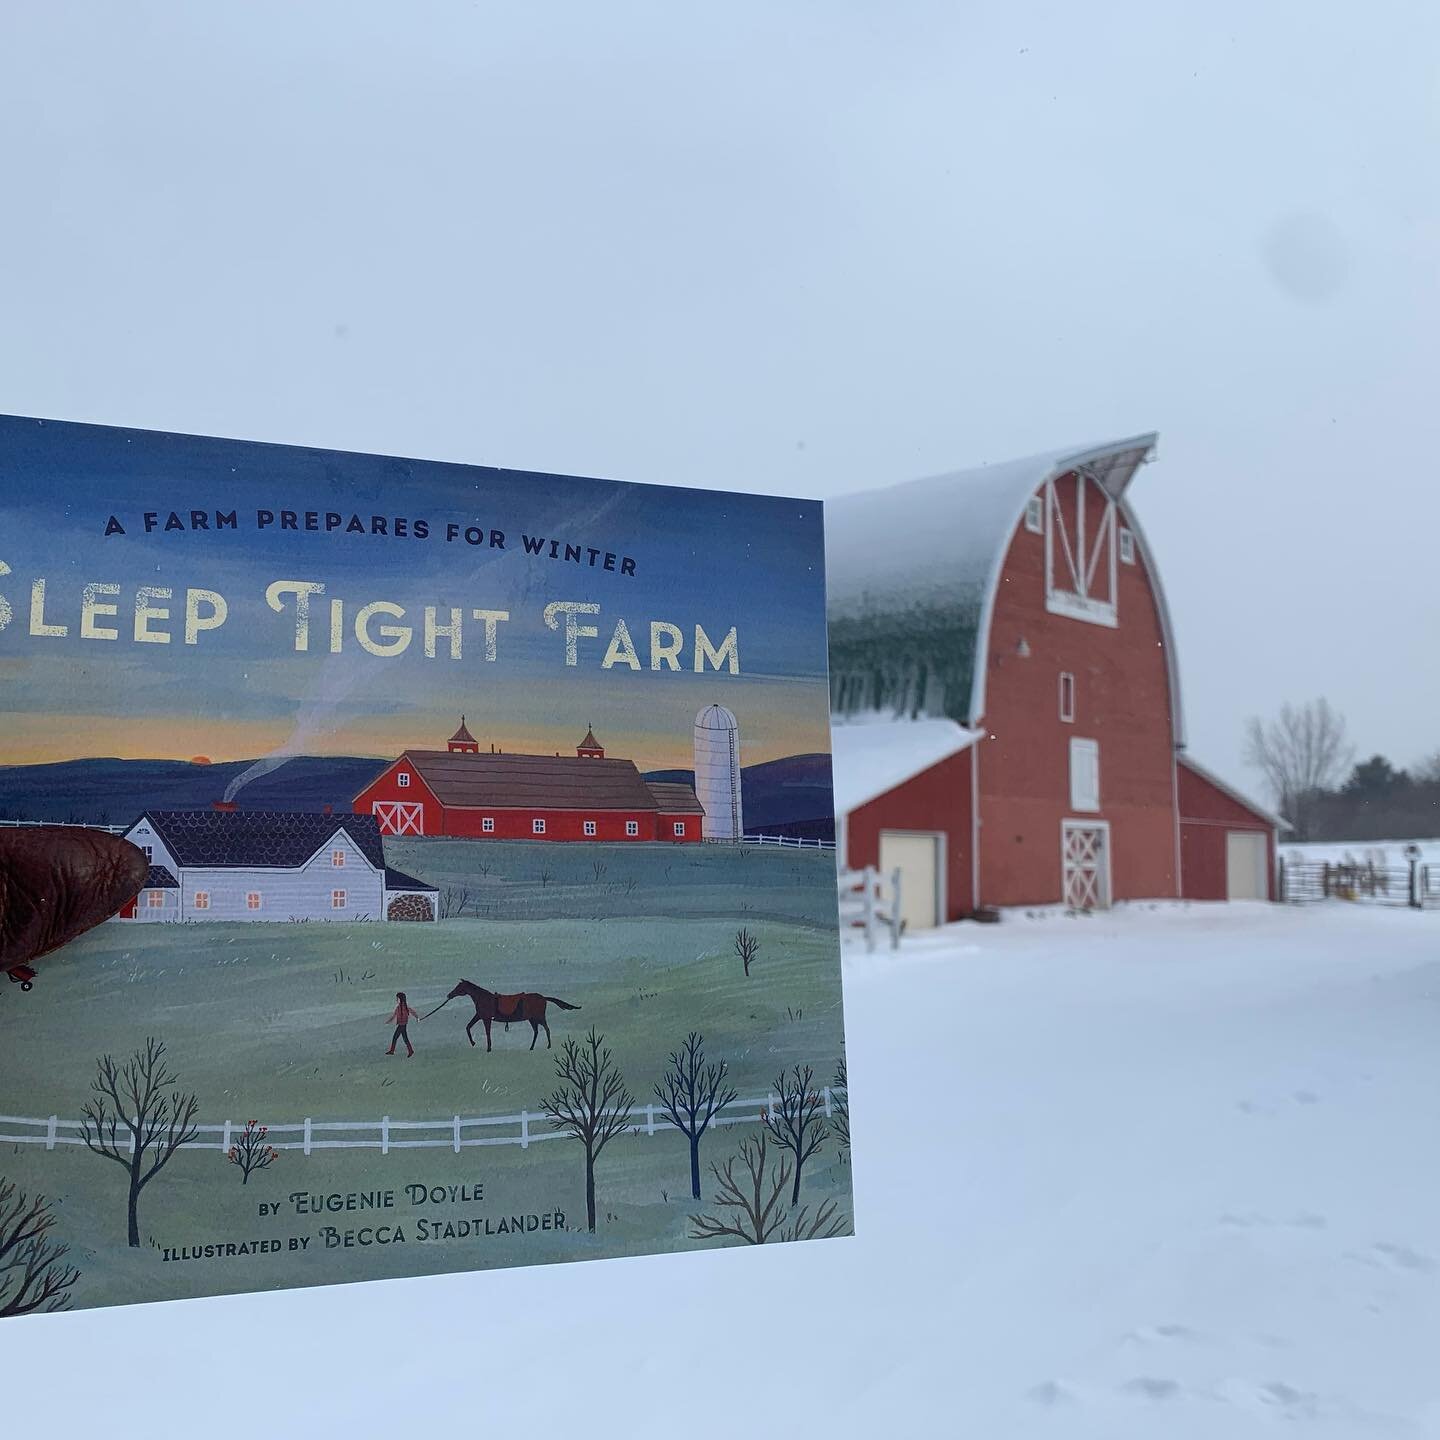 We got to read one of our favorite books and give a snowy virtual tour to our friends at @valleyfriendshipclub!